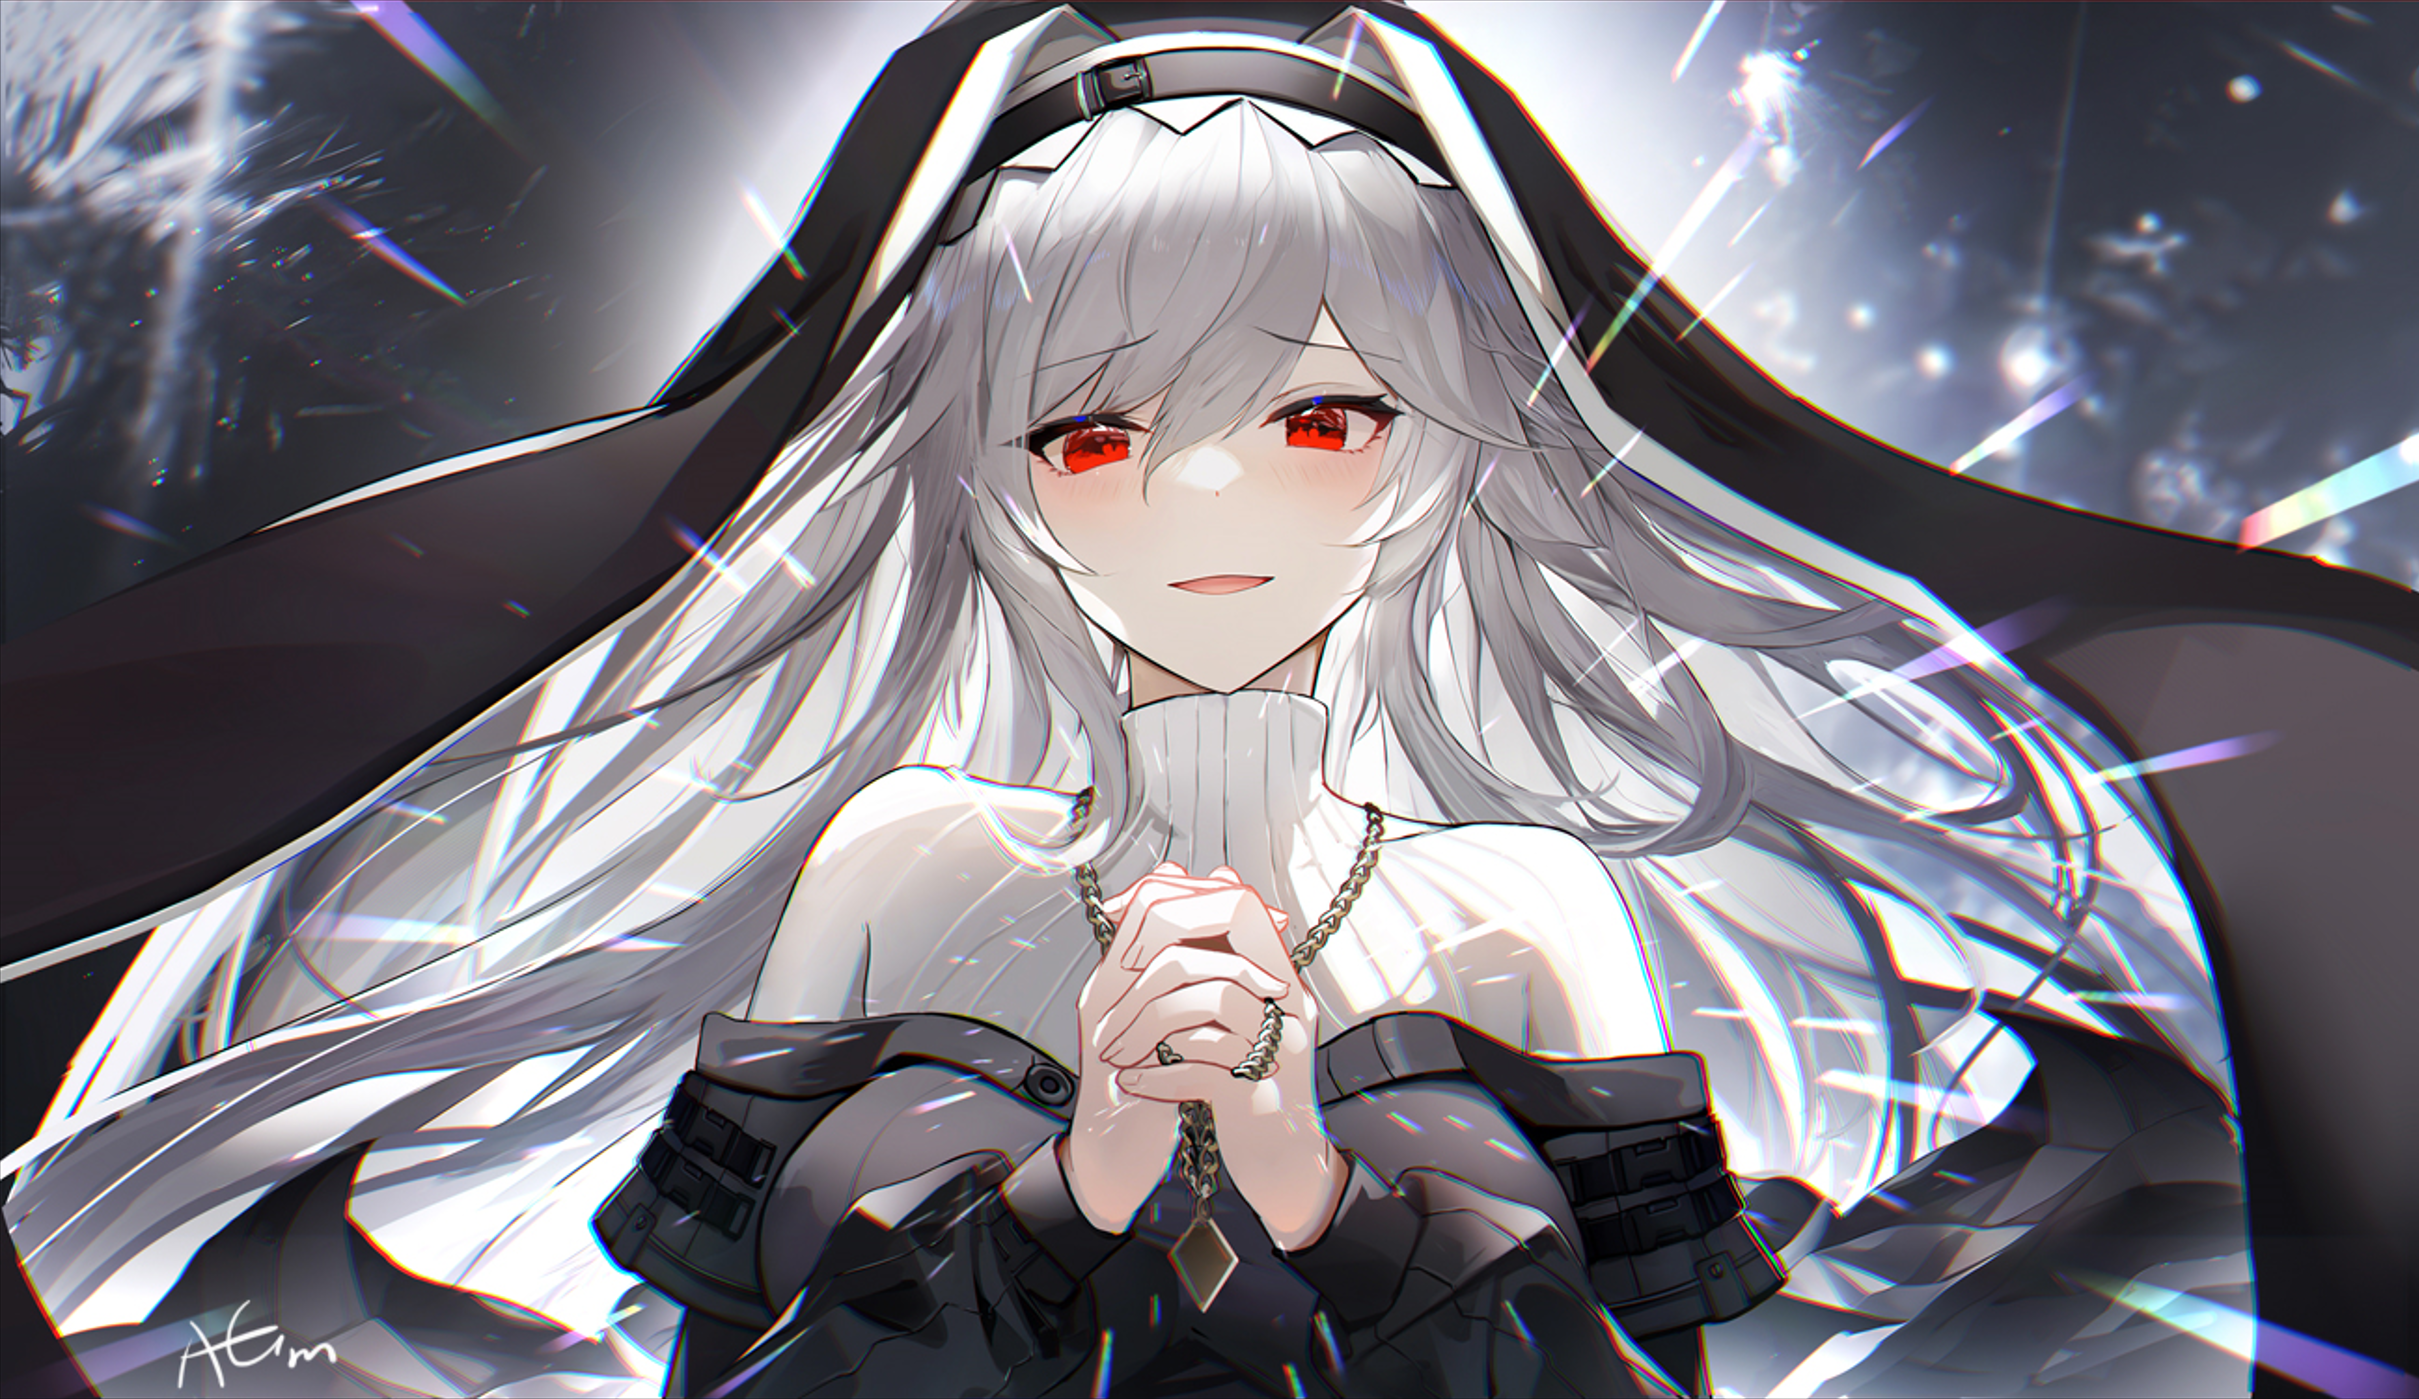 Anime 2419x1399 Arknights Specter(Arknights) Omone Hokoma Agm anime girls red eyes silver hair nuns nun outfit blushing necklace praying folded hands